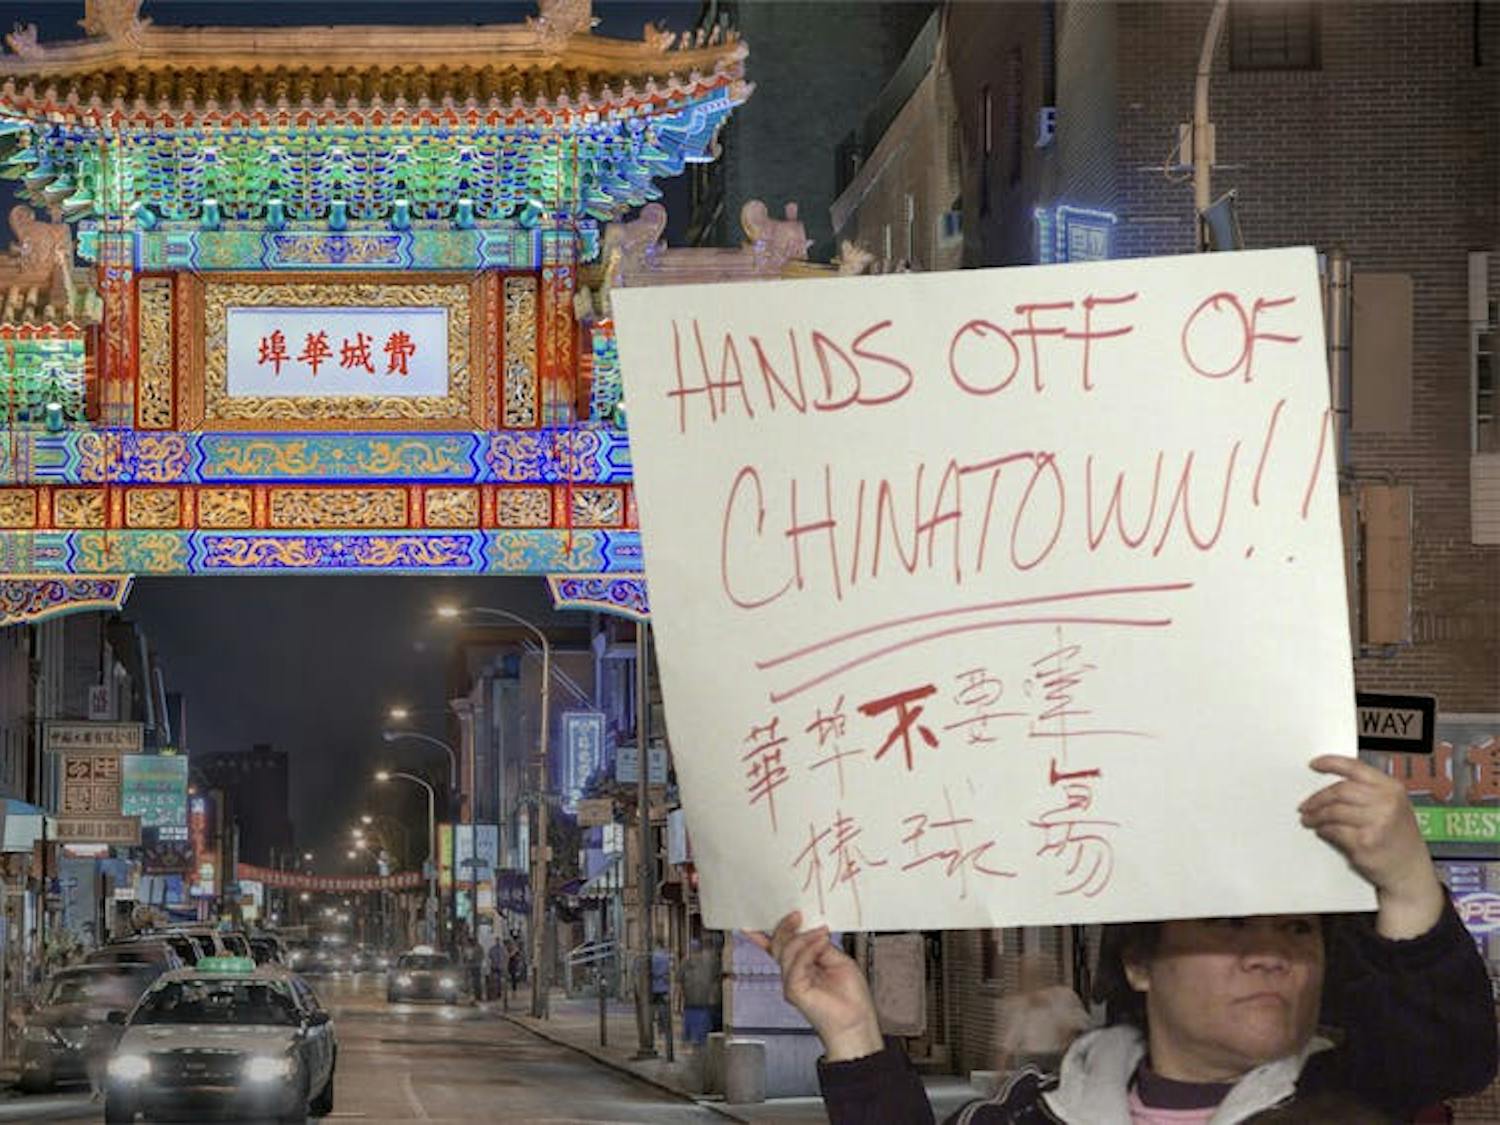 A picture of a protestor outside of Chinatown's gates | Source: 34th Street Magazine 